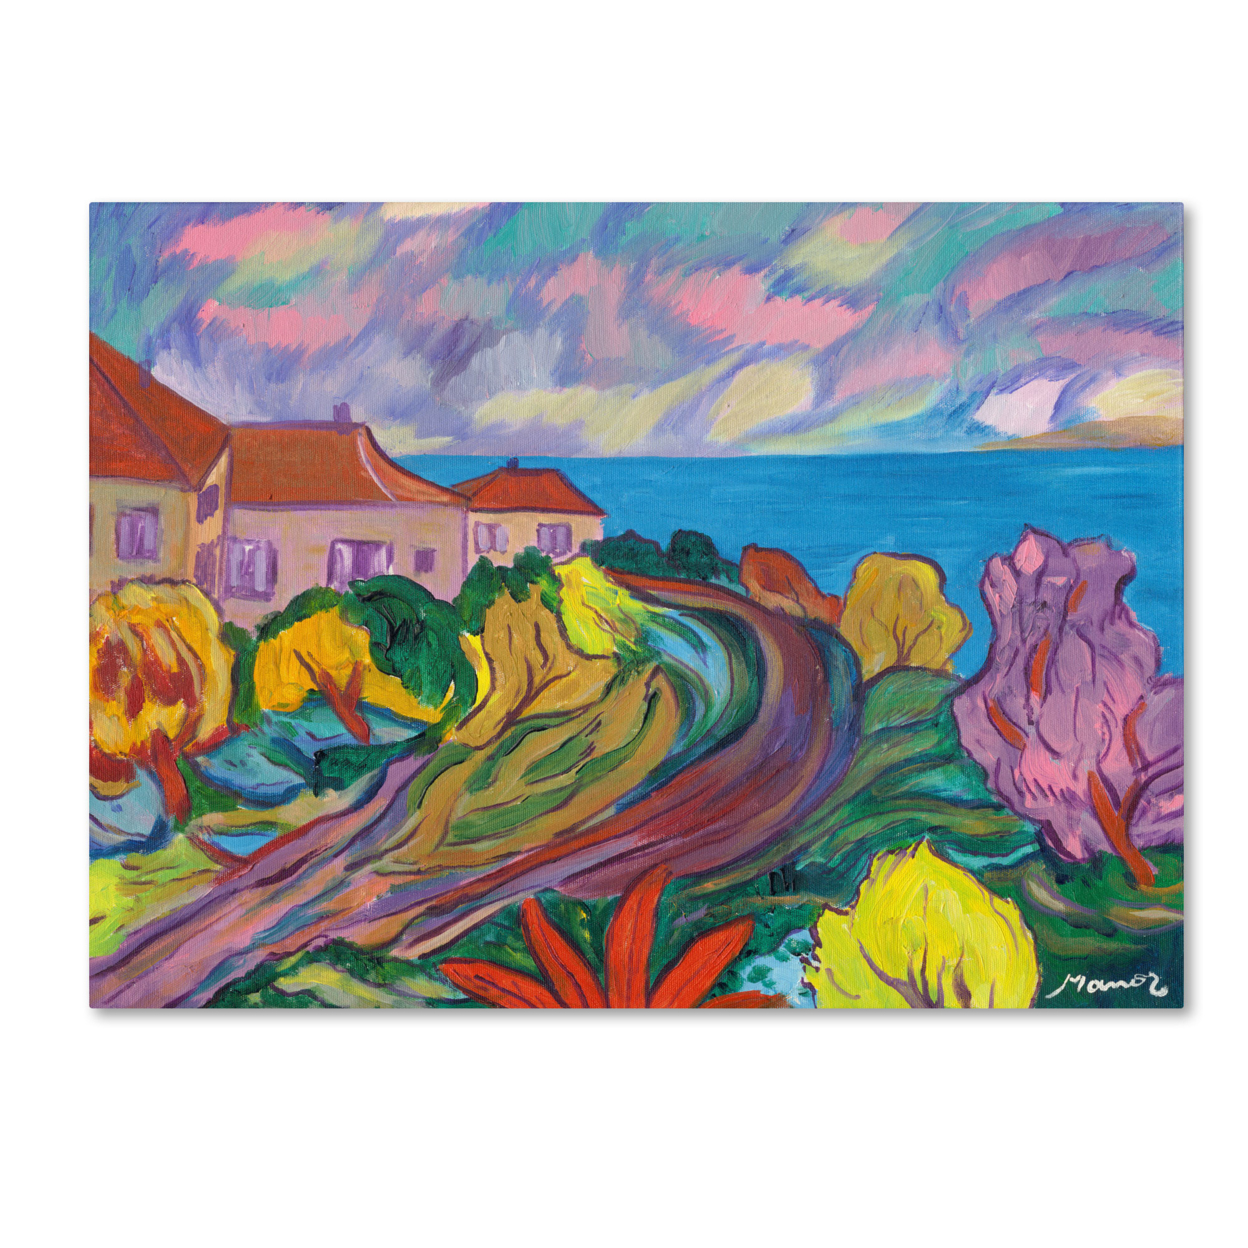 Manor Shadian 'Winding Path By Ocean' Canvas Wall Art 35 X 47 Inches